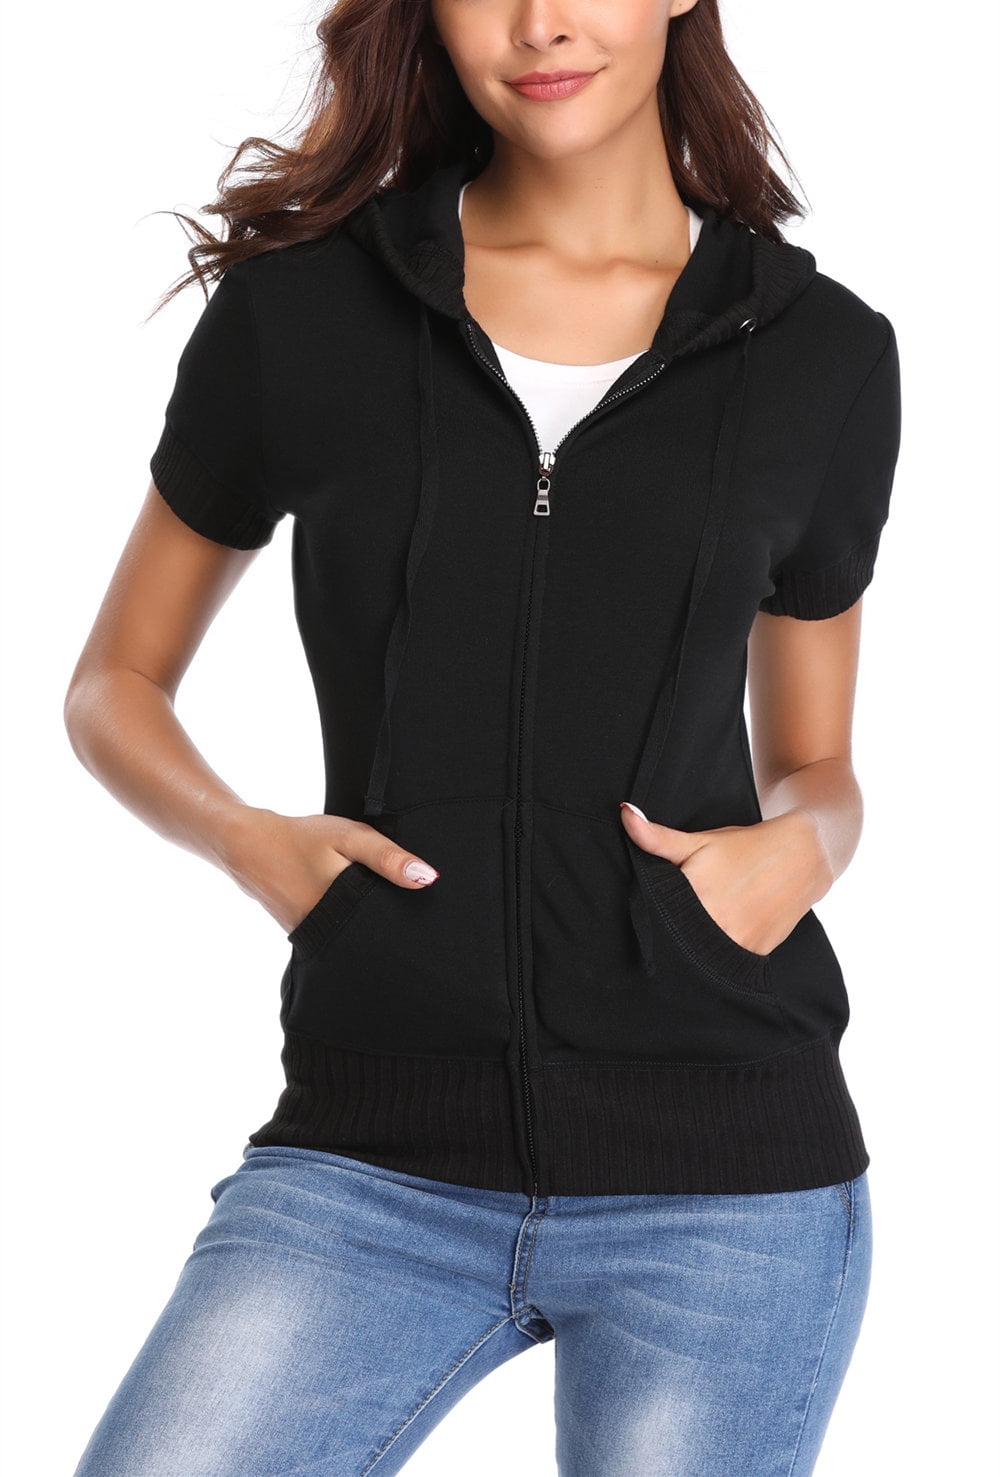 MISS MOLY - MISS MOLY Women's Short Sleeve Hoodie Jacket Zip Up Cotton ...